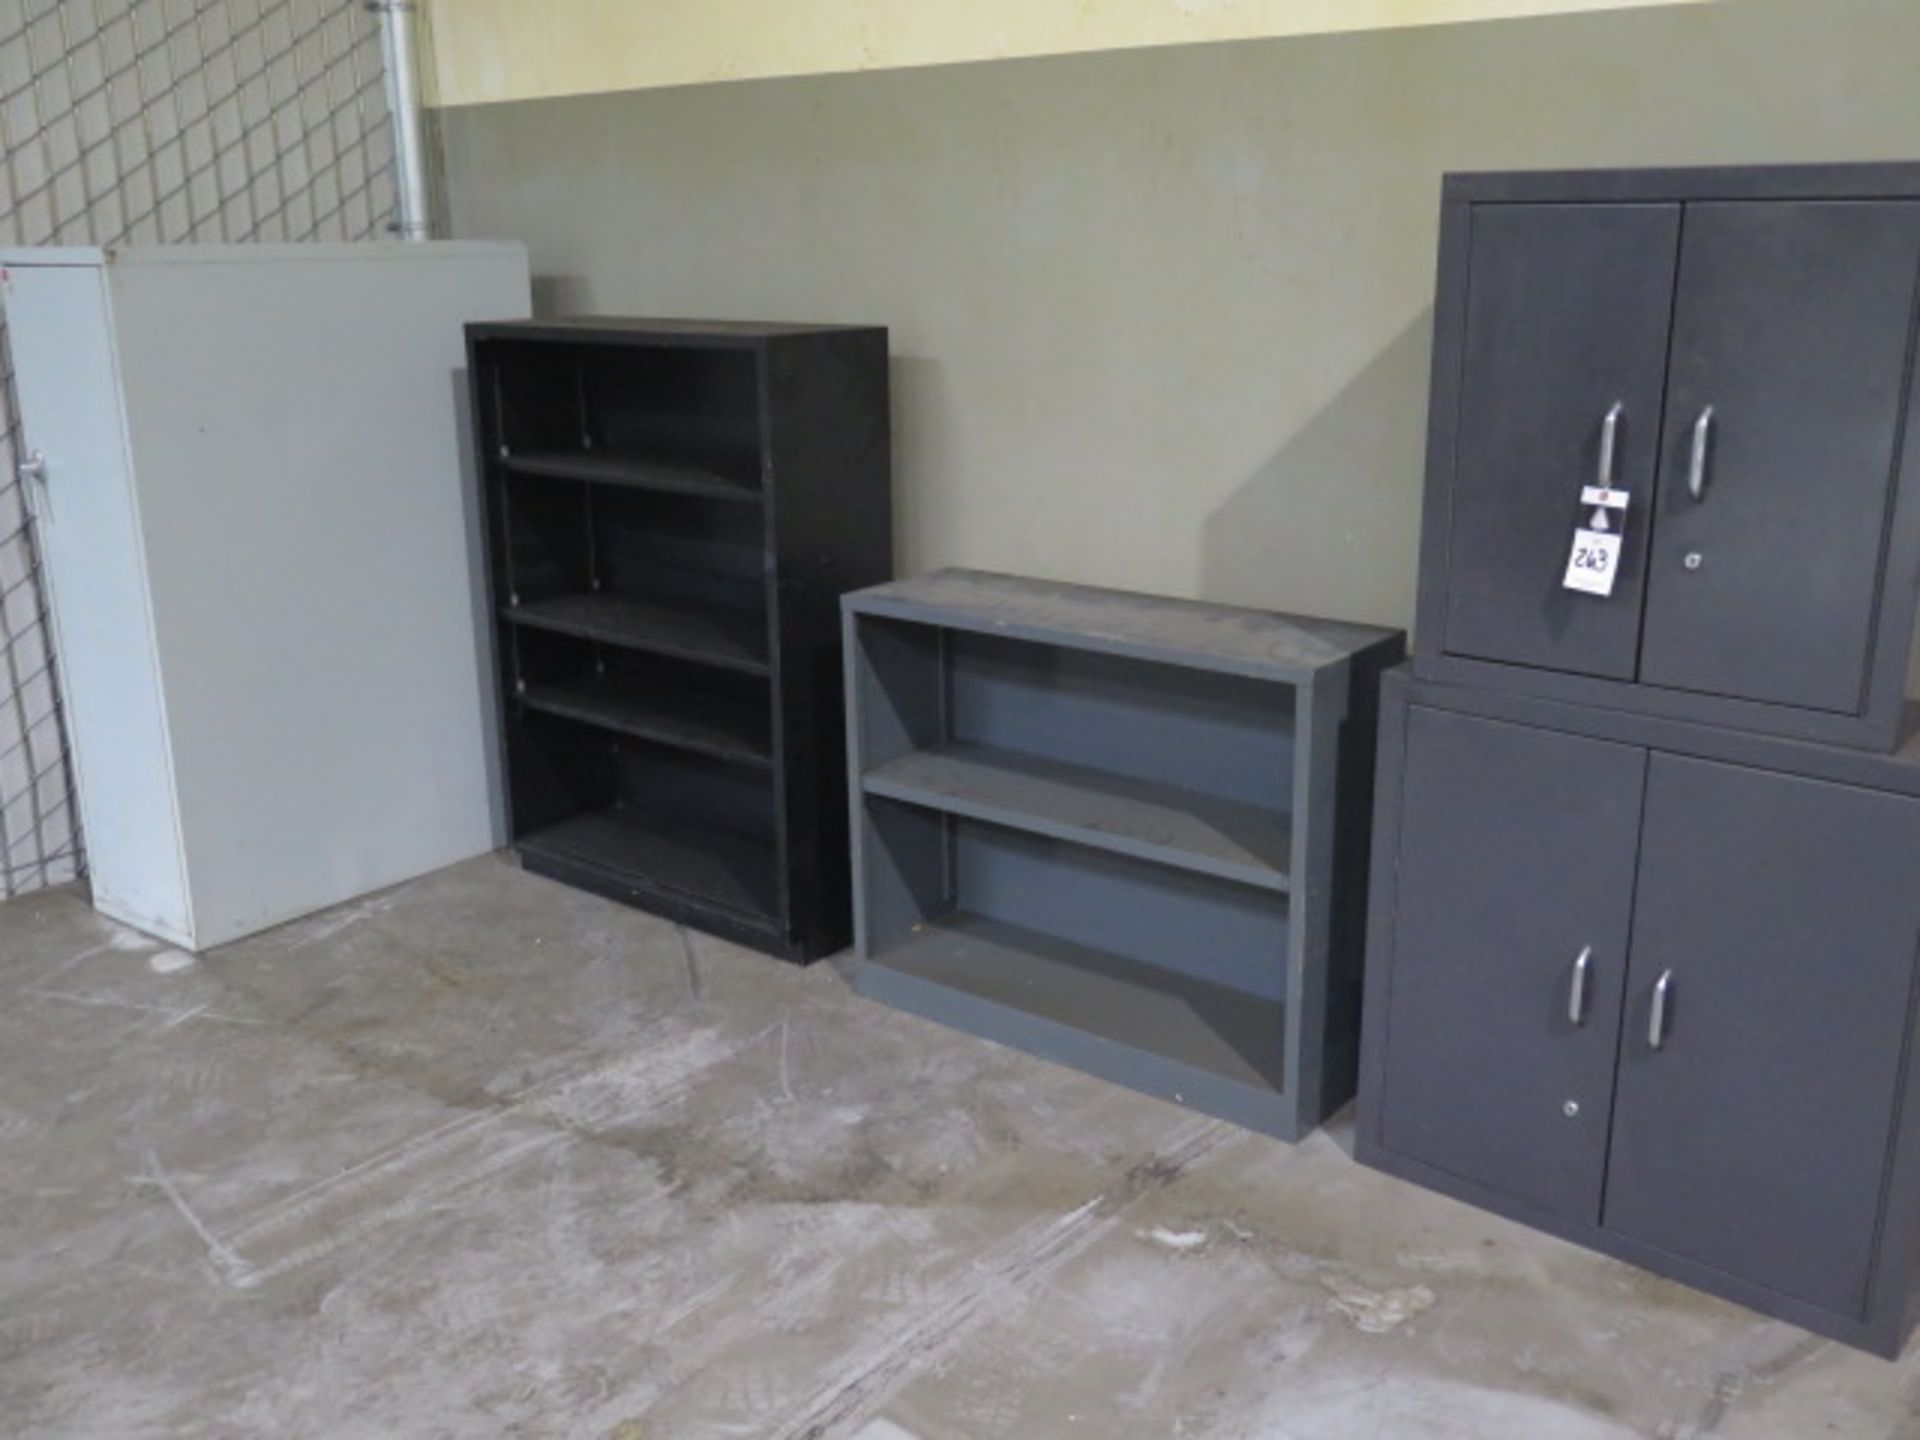 Cabinets and Shelves (SOLD AS-IS - NO WARRANTY)